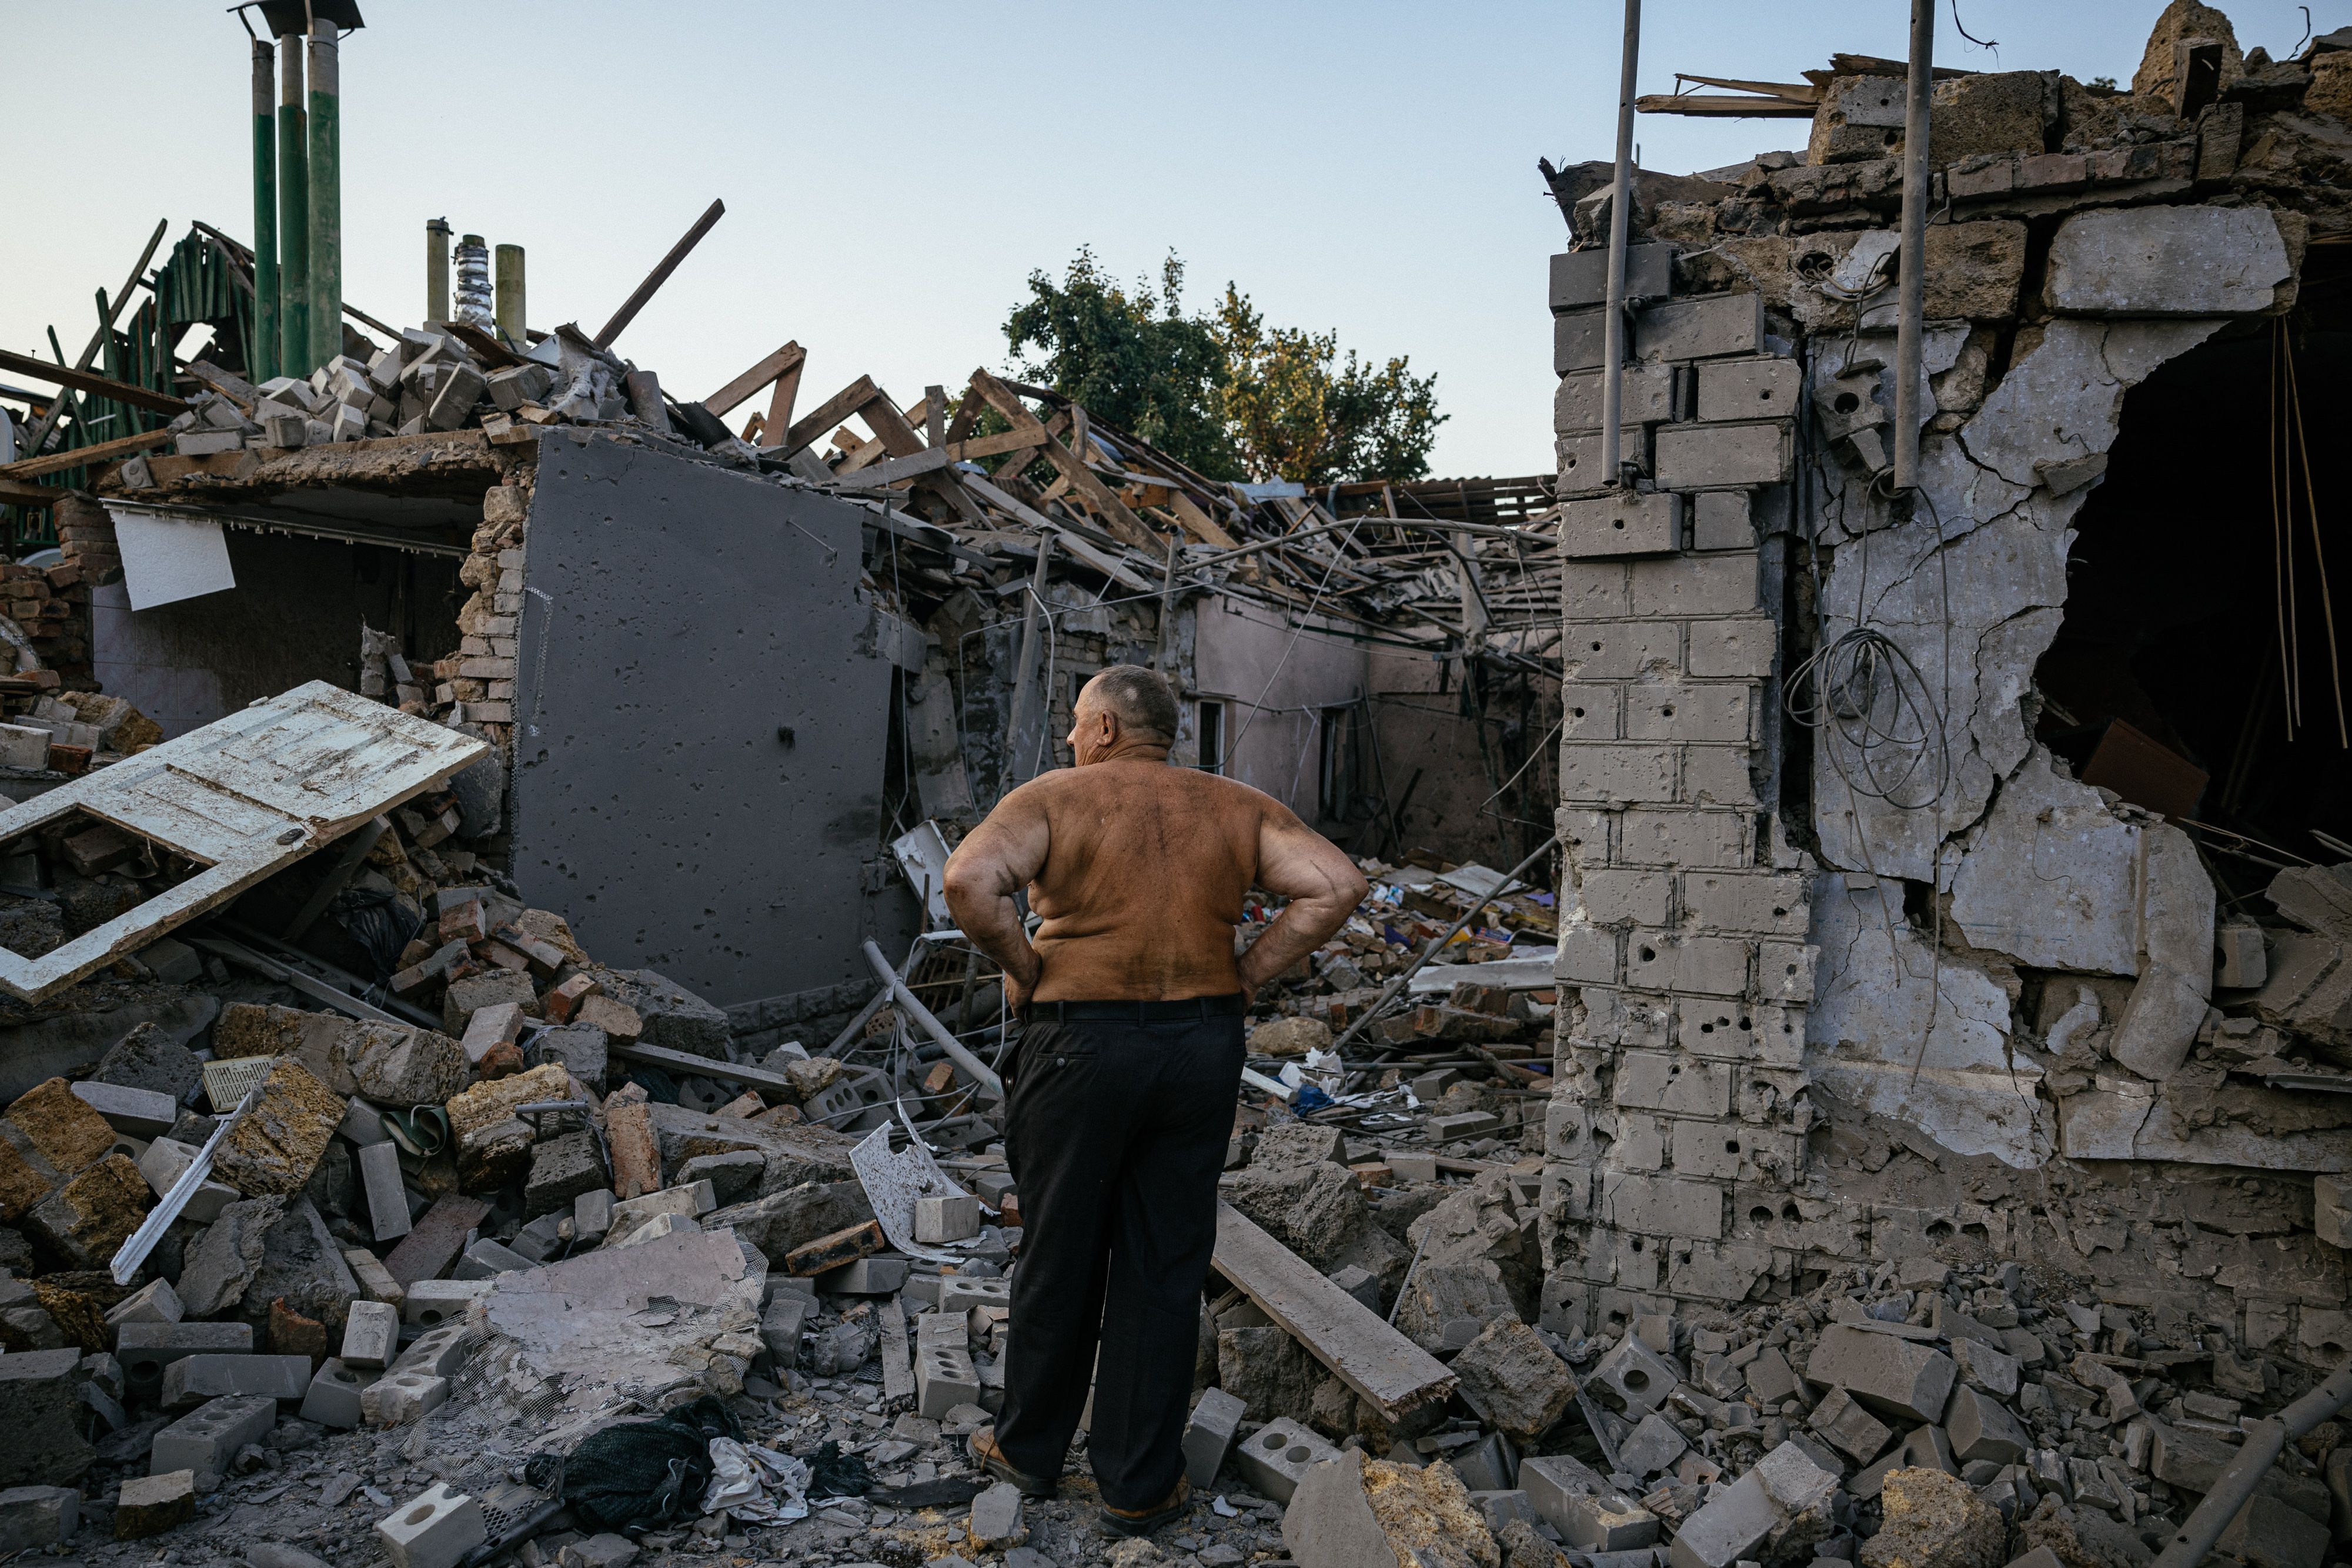 Oleksandr Shulga looks at his destroyed house following a missile strike in Mykolaiv, southern Ukraine, on August 29, 2022, 